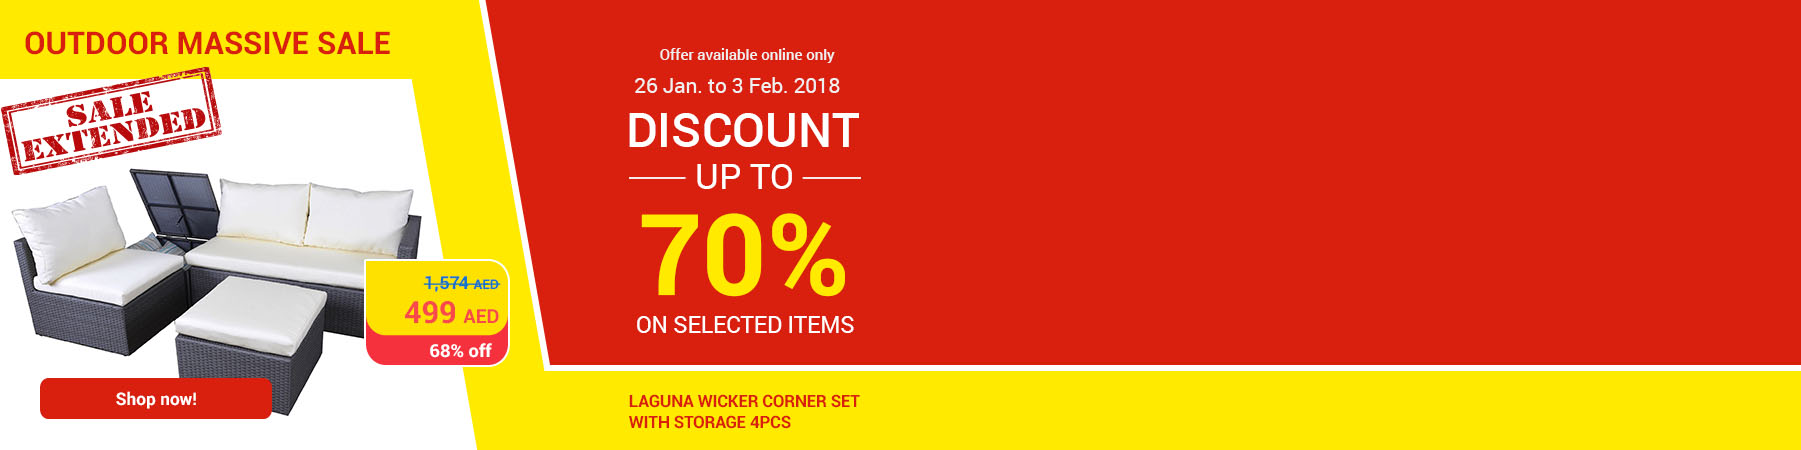 Carrefouruae Offers with massive Outdoor Clearance Sale